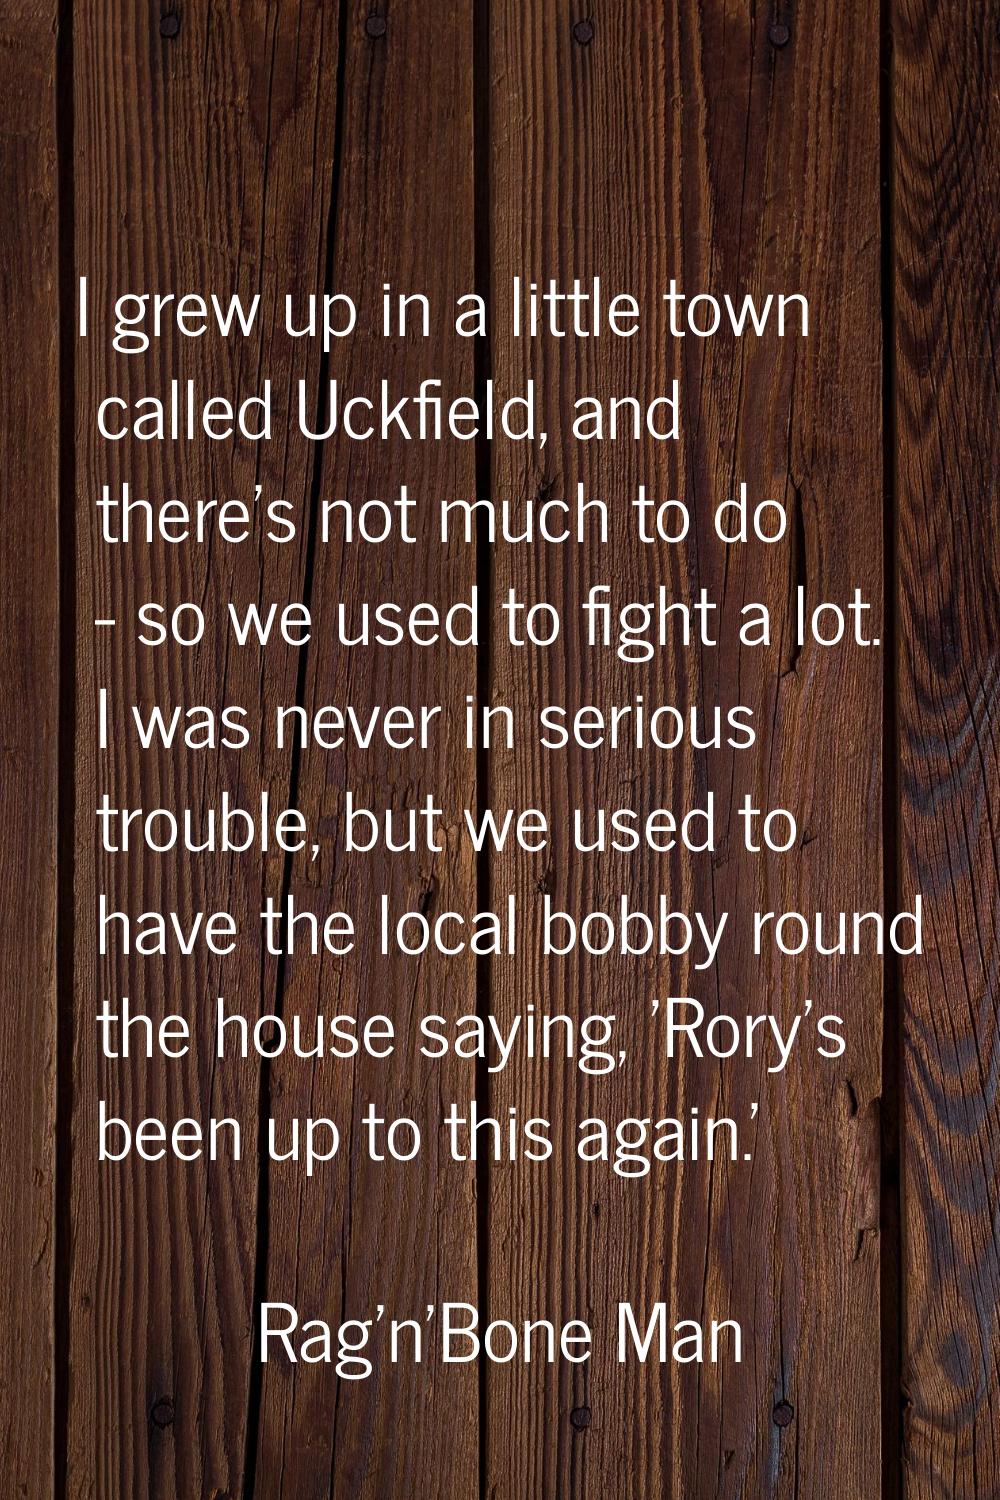 I grew up in a little town called Uckfield, and there's not much to do - so we used to fight a lot.